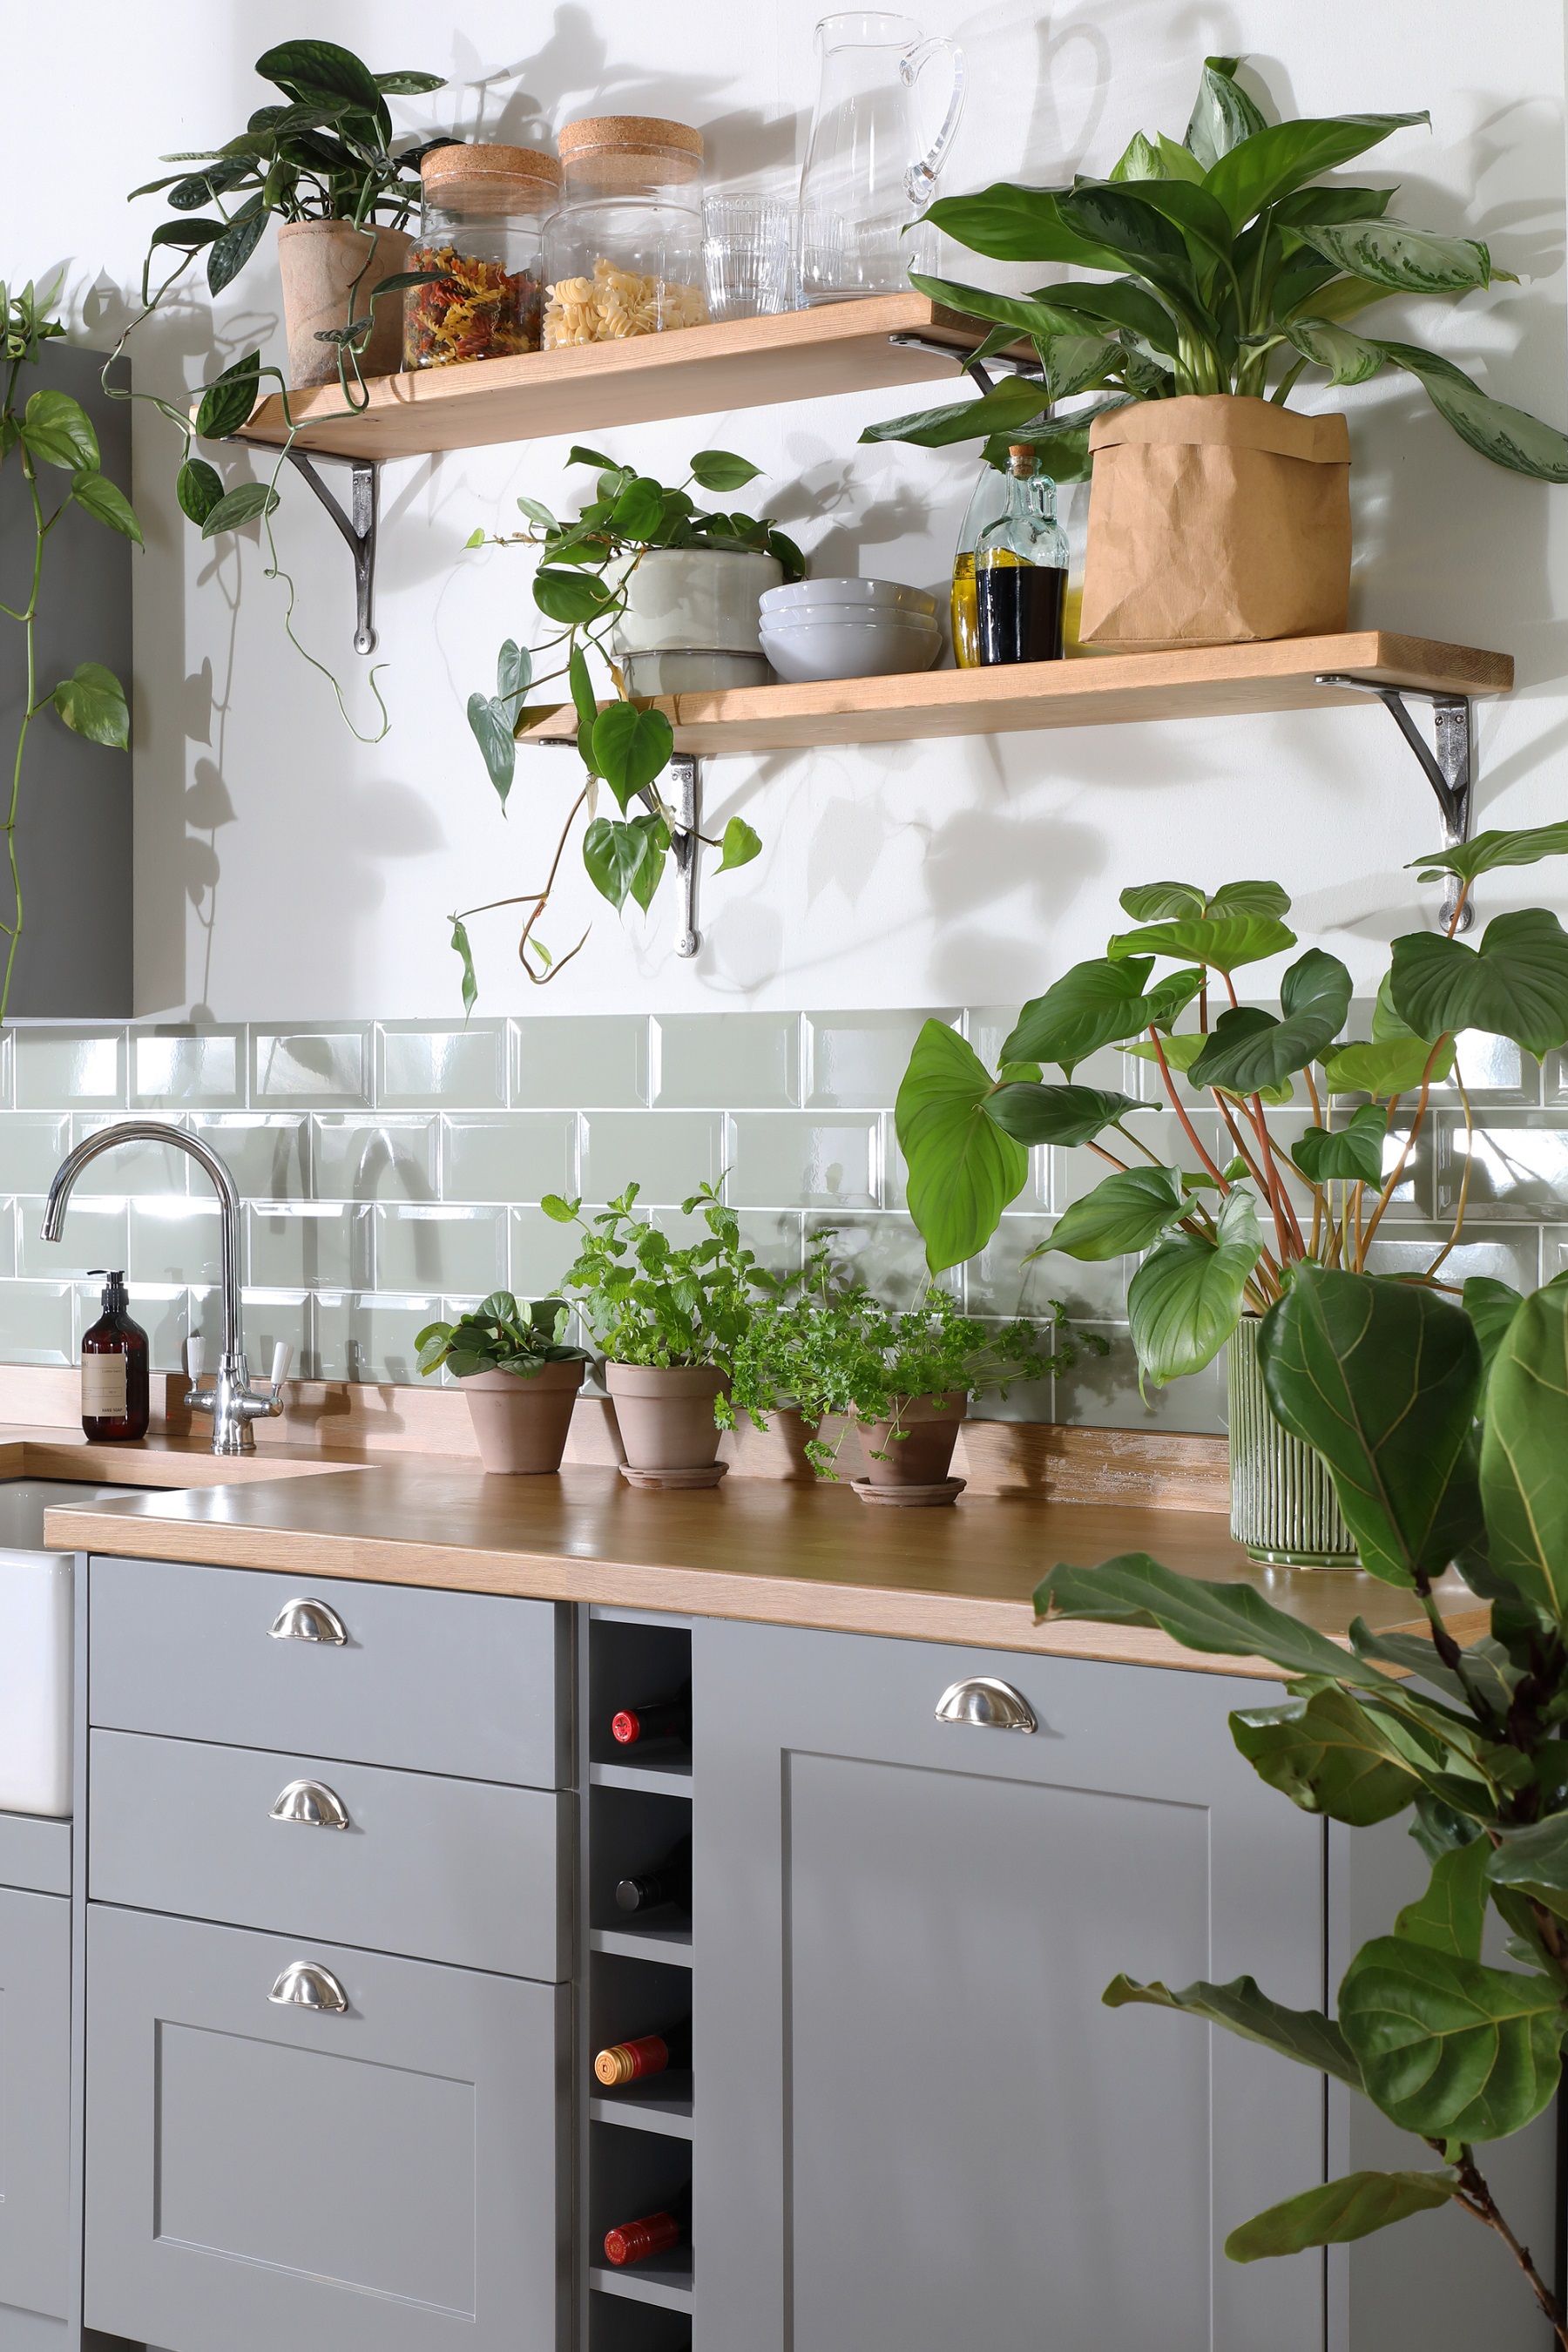 Kitchen island with many indoor plants and greenery